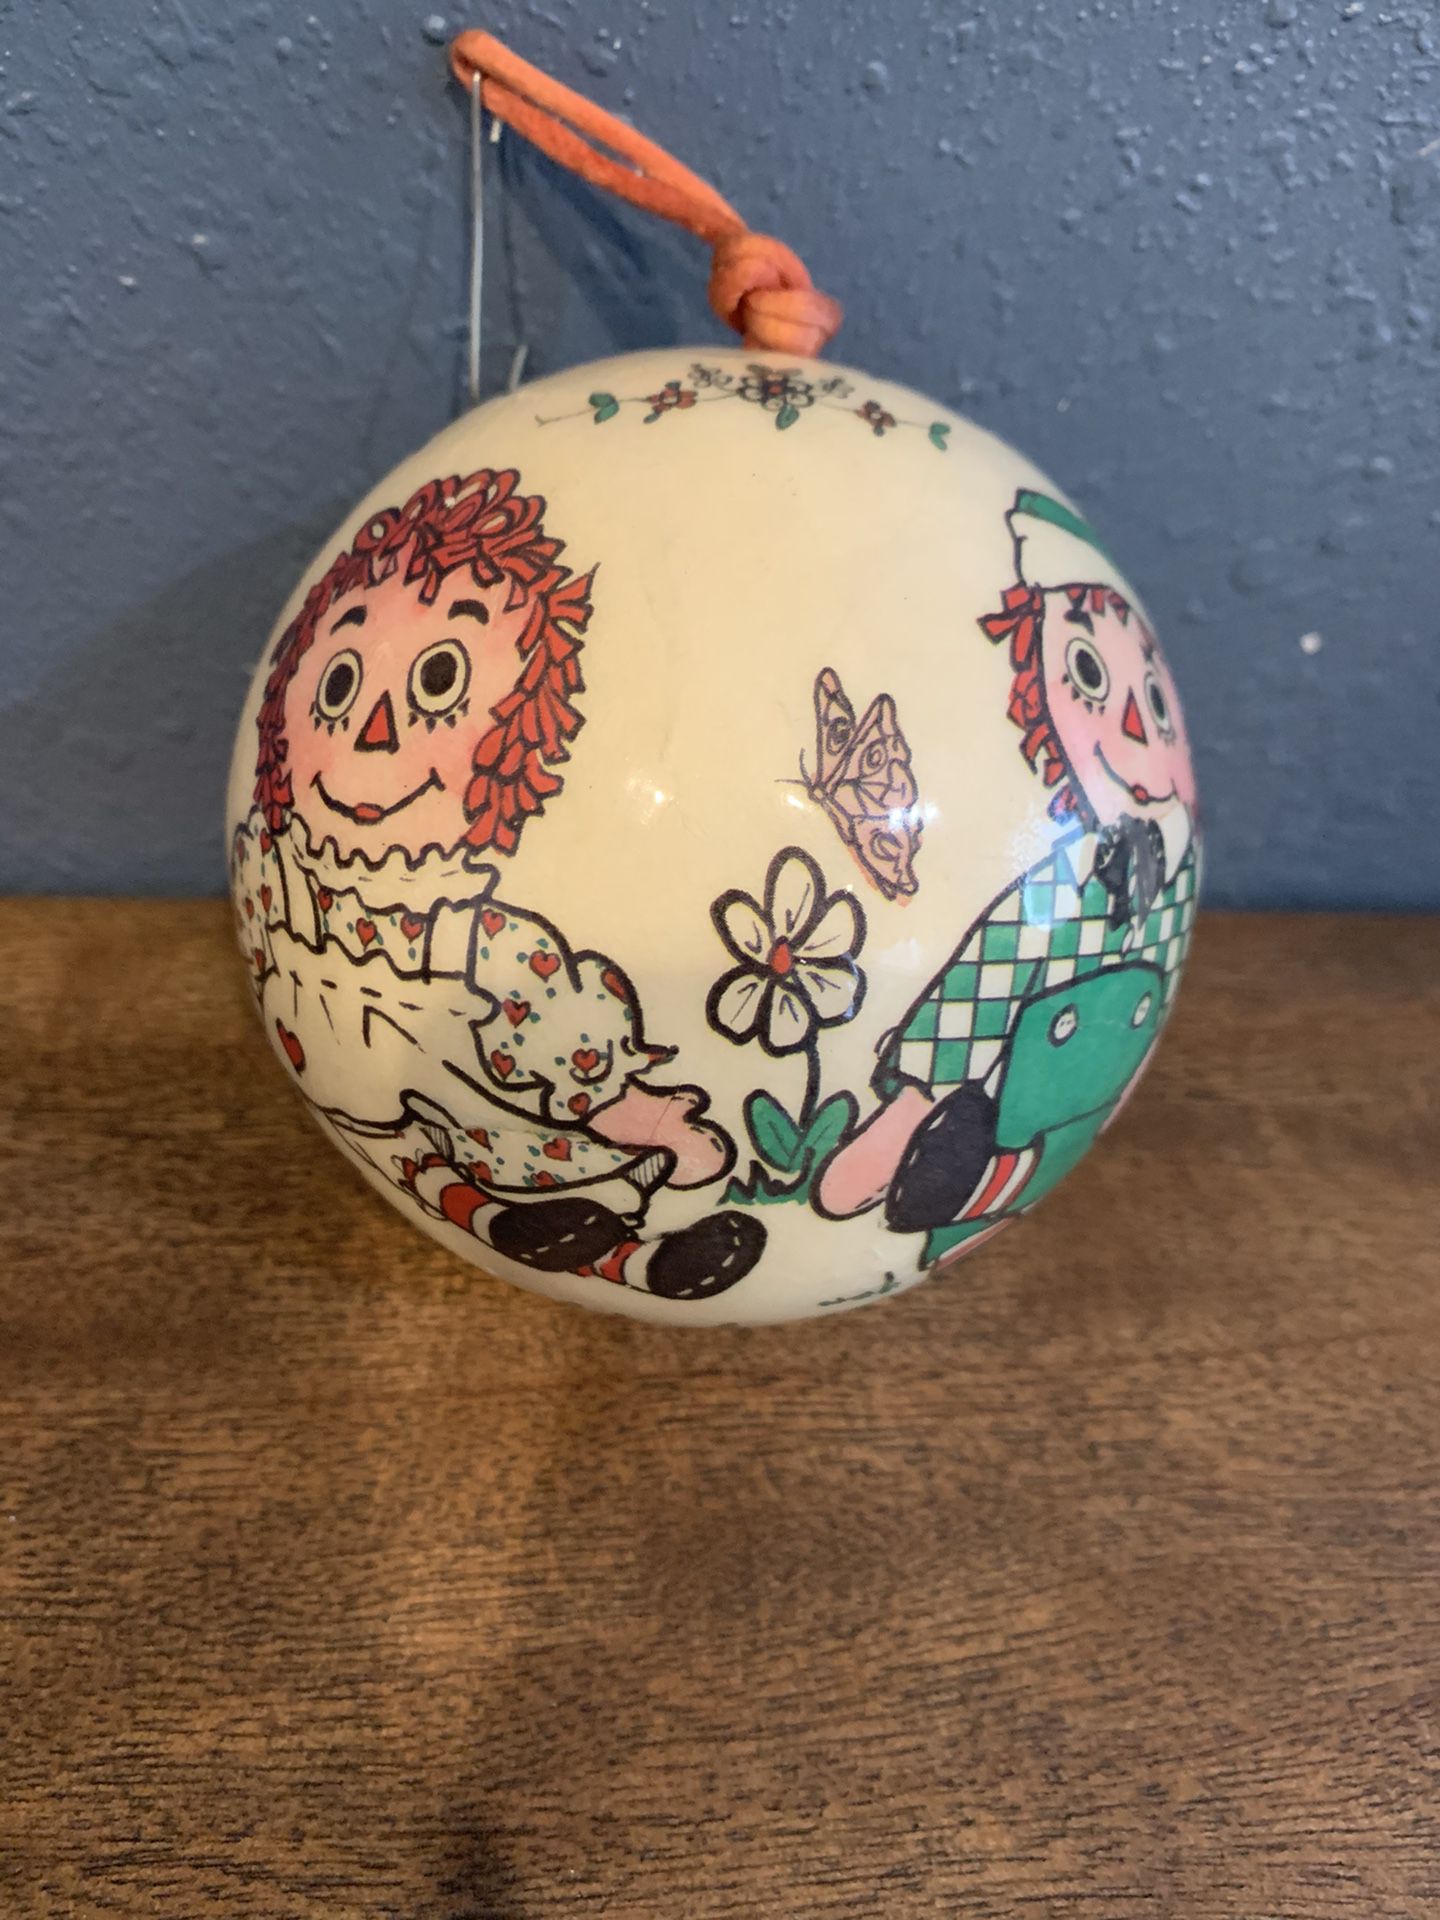 Raggedy Ann and Andy Christmas ornament